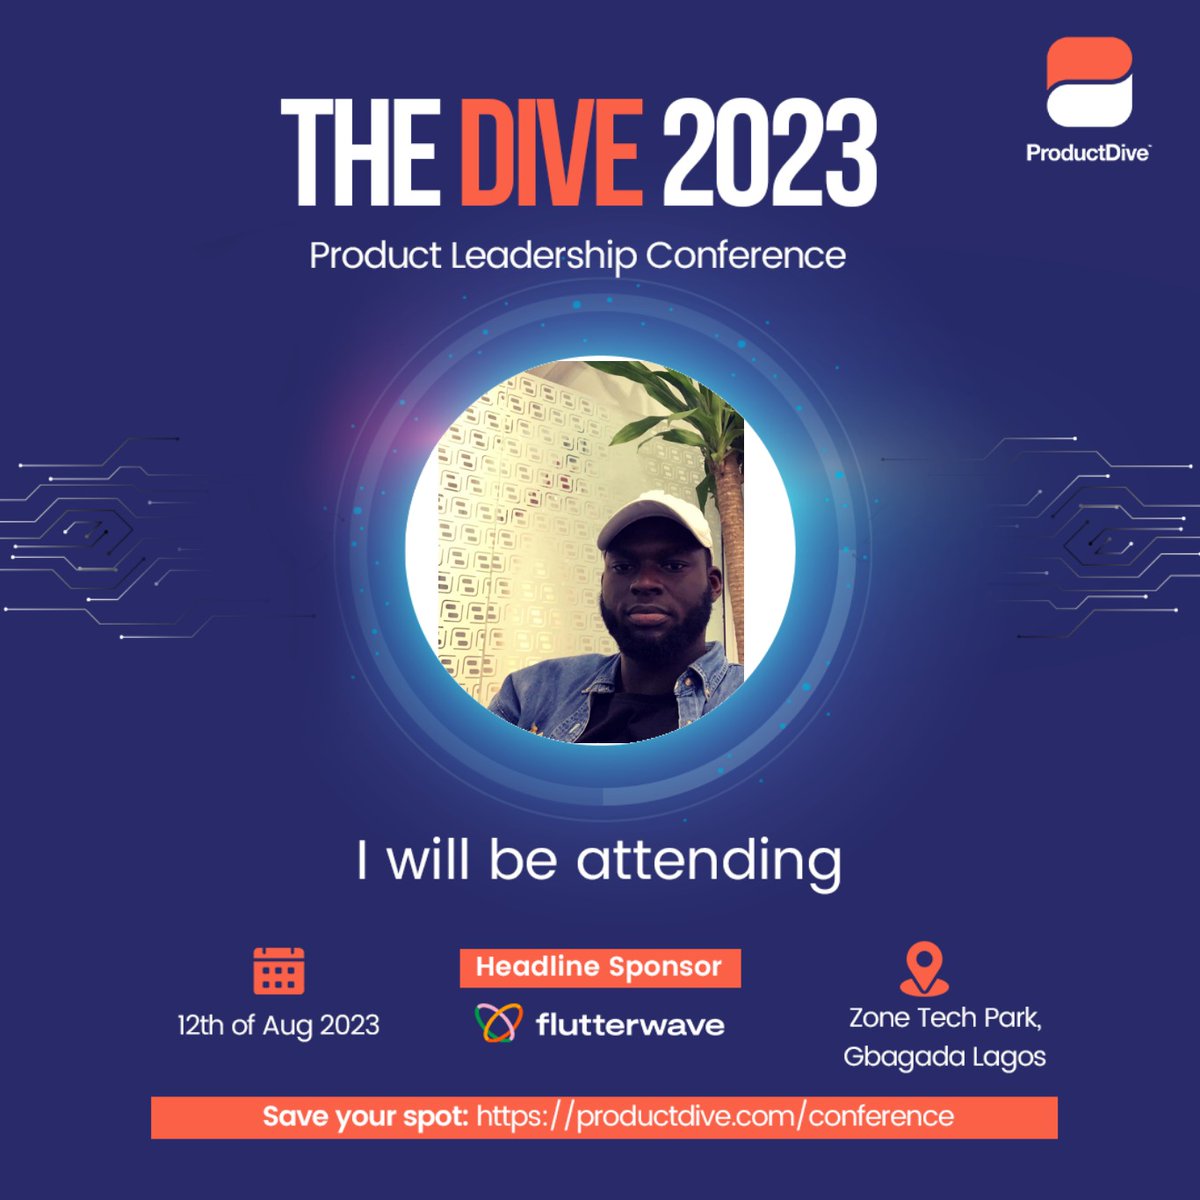 Thrilled to be attending The DIVE 2023 Conference today! 🚀 

Excited to learn hands-on, product ideation, agile project management, Product growth strategies, connect with experts, and more.  

See you there! 

#ProductLeadership #ProductDive #TheDIVE2023